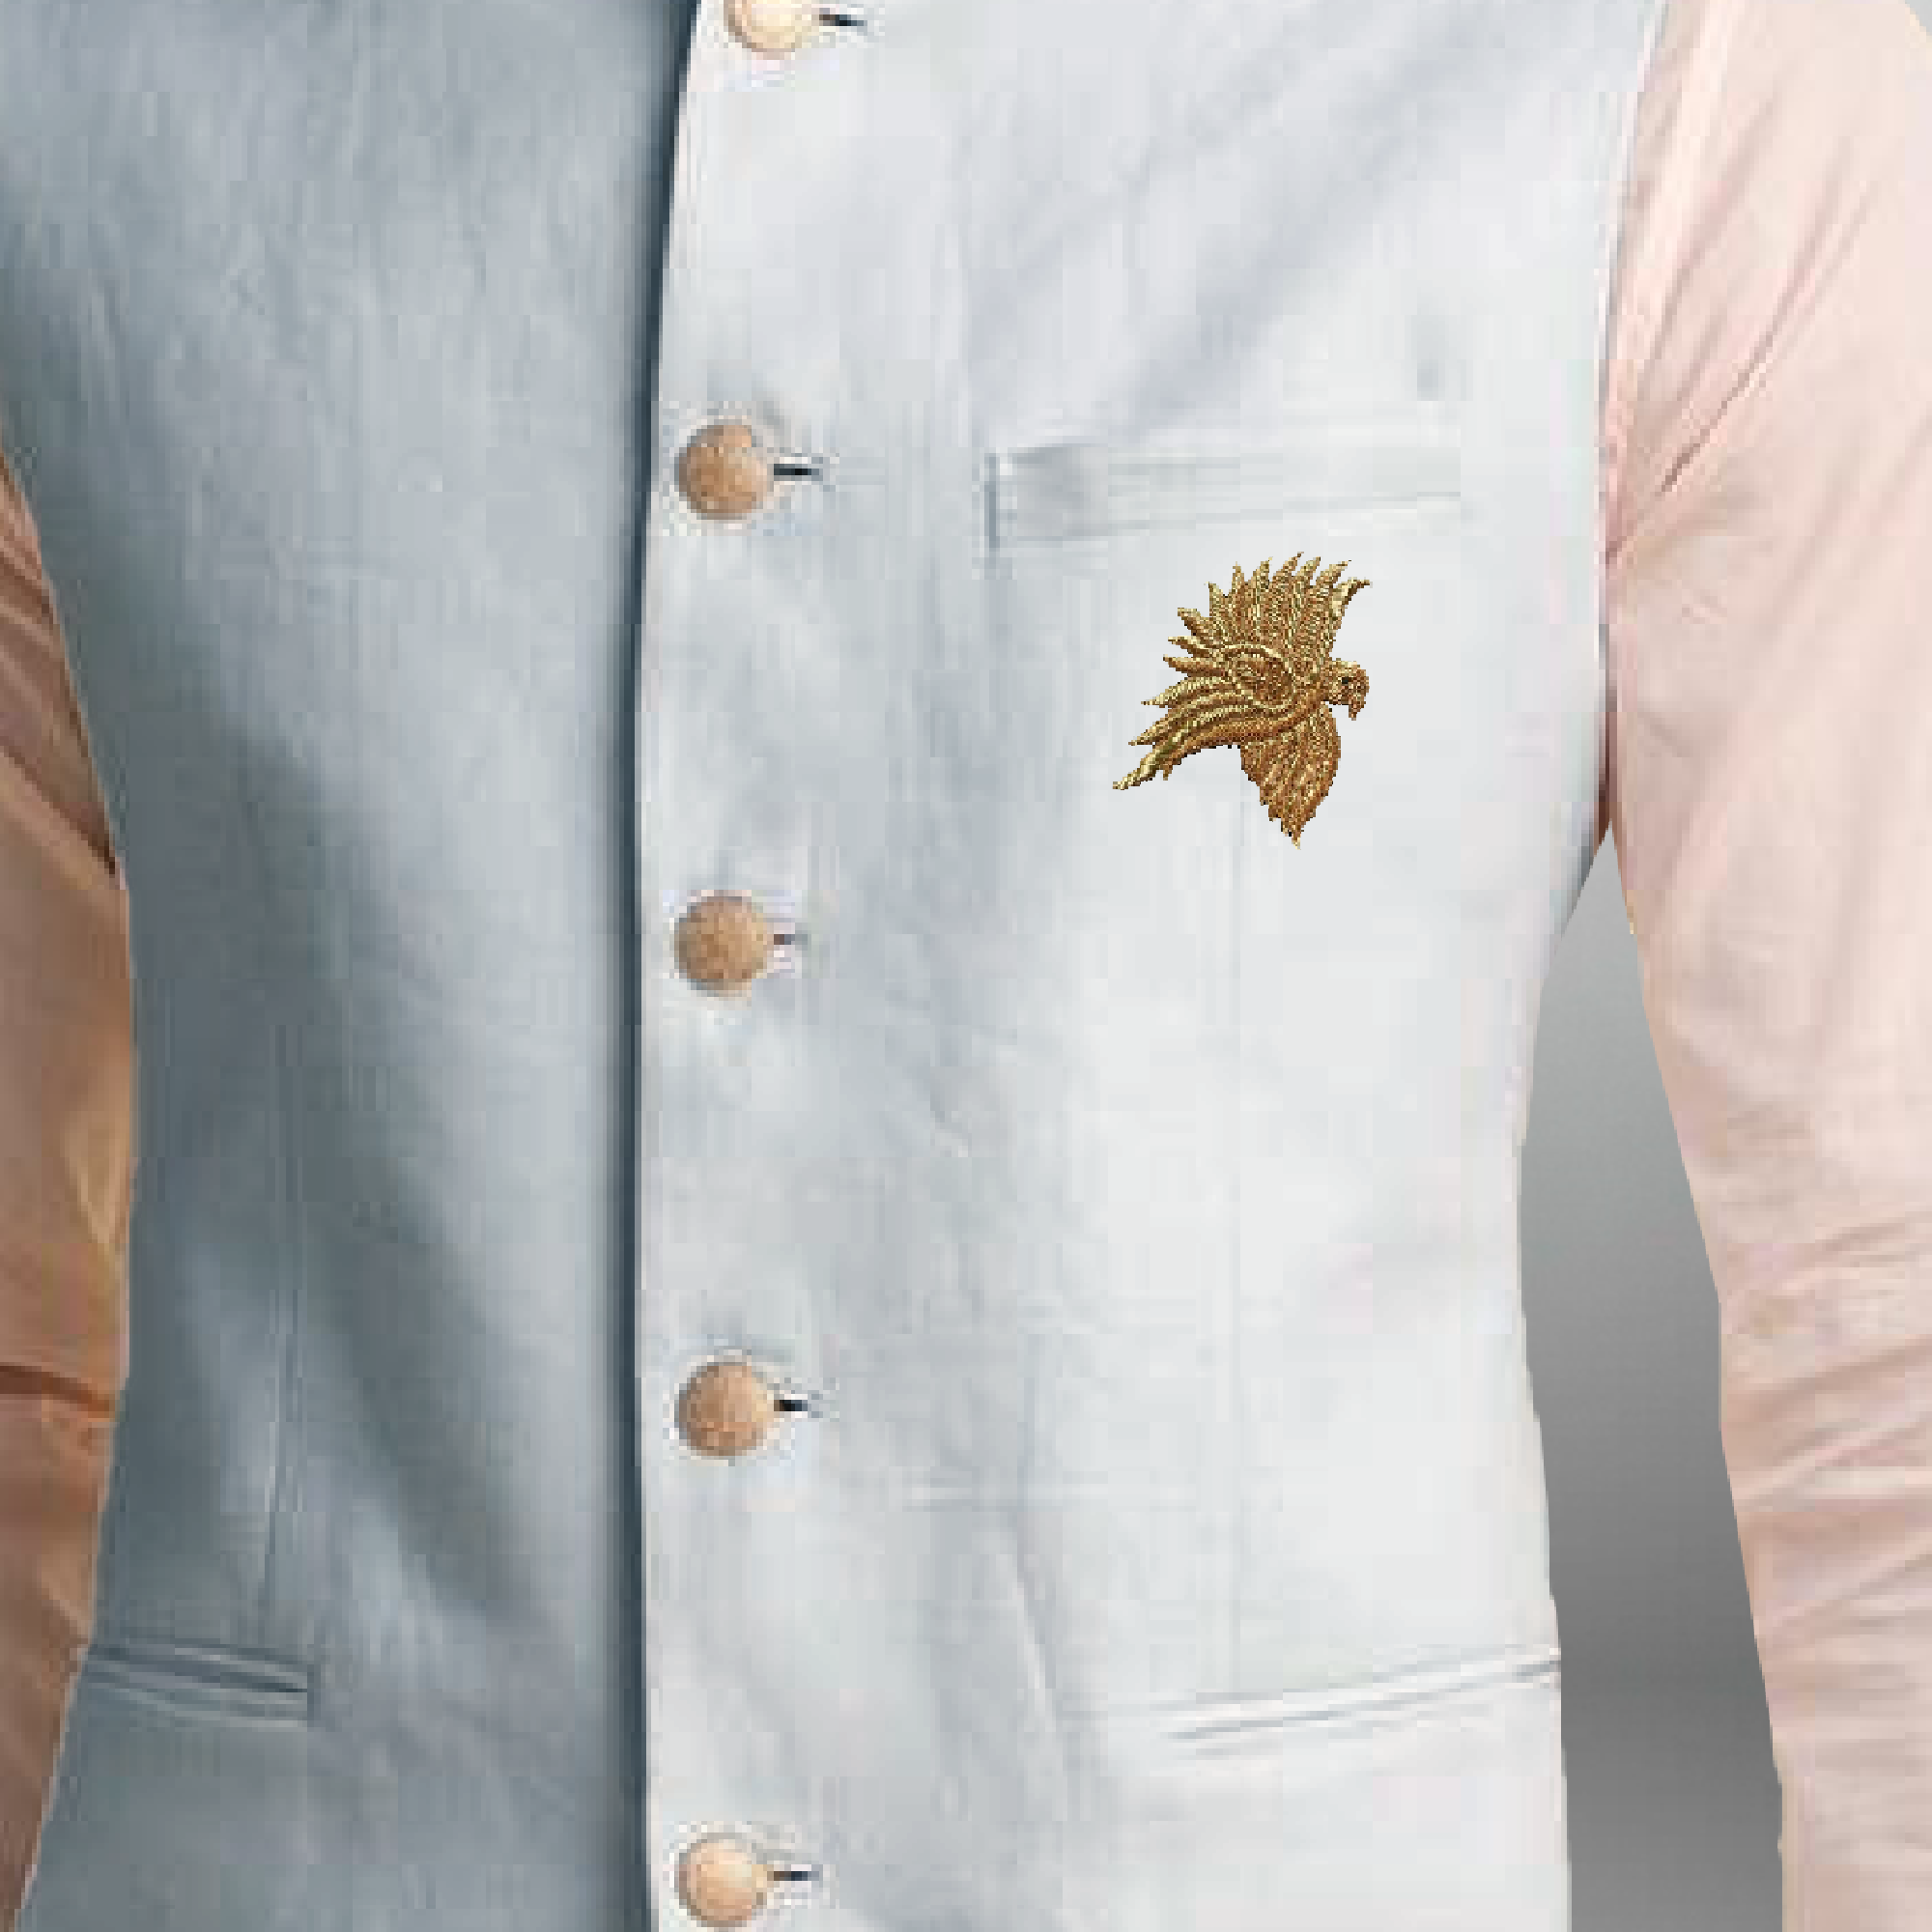 Men's Light Blue waistcoat with front Golden embroidery-RMWC002